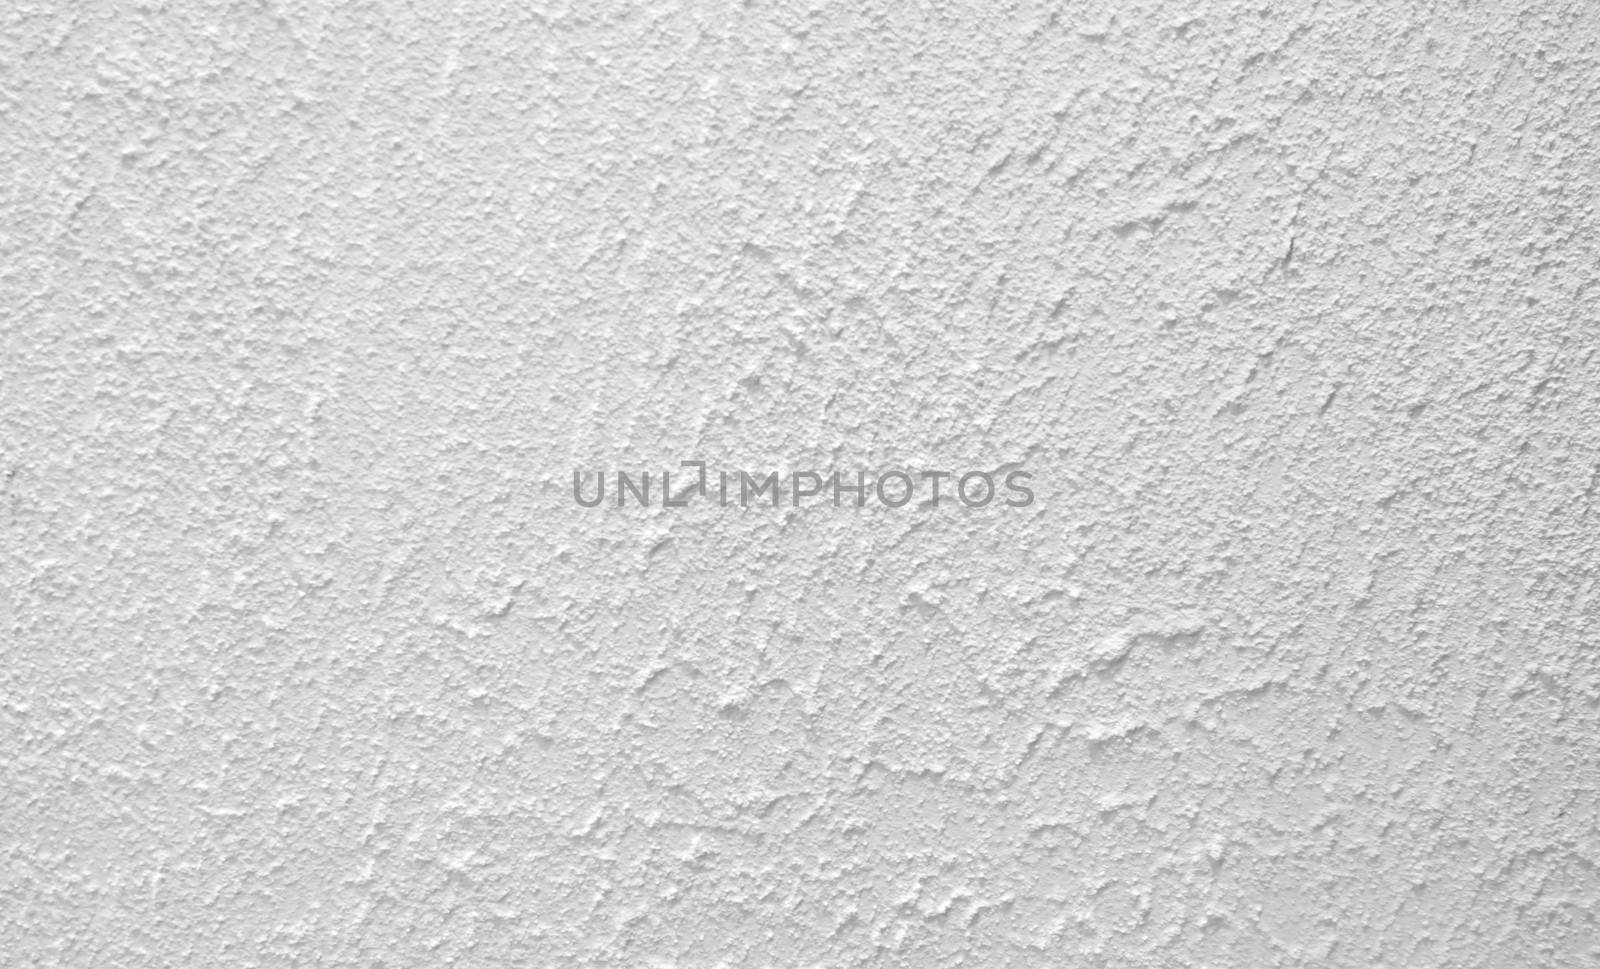 Old White Raw Concrete Wall Texture Background Suitable for Presentation, Paper Texture, and Web Templates with Space for Text.